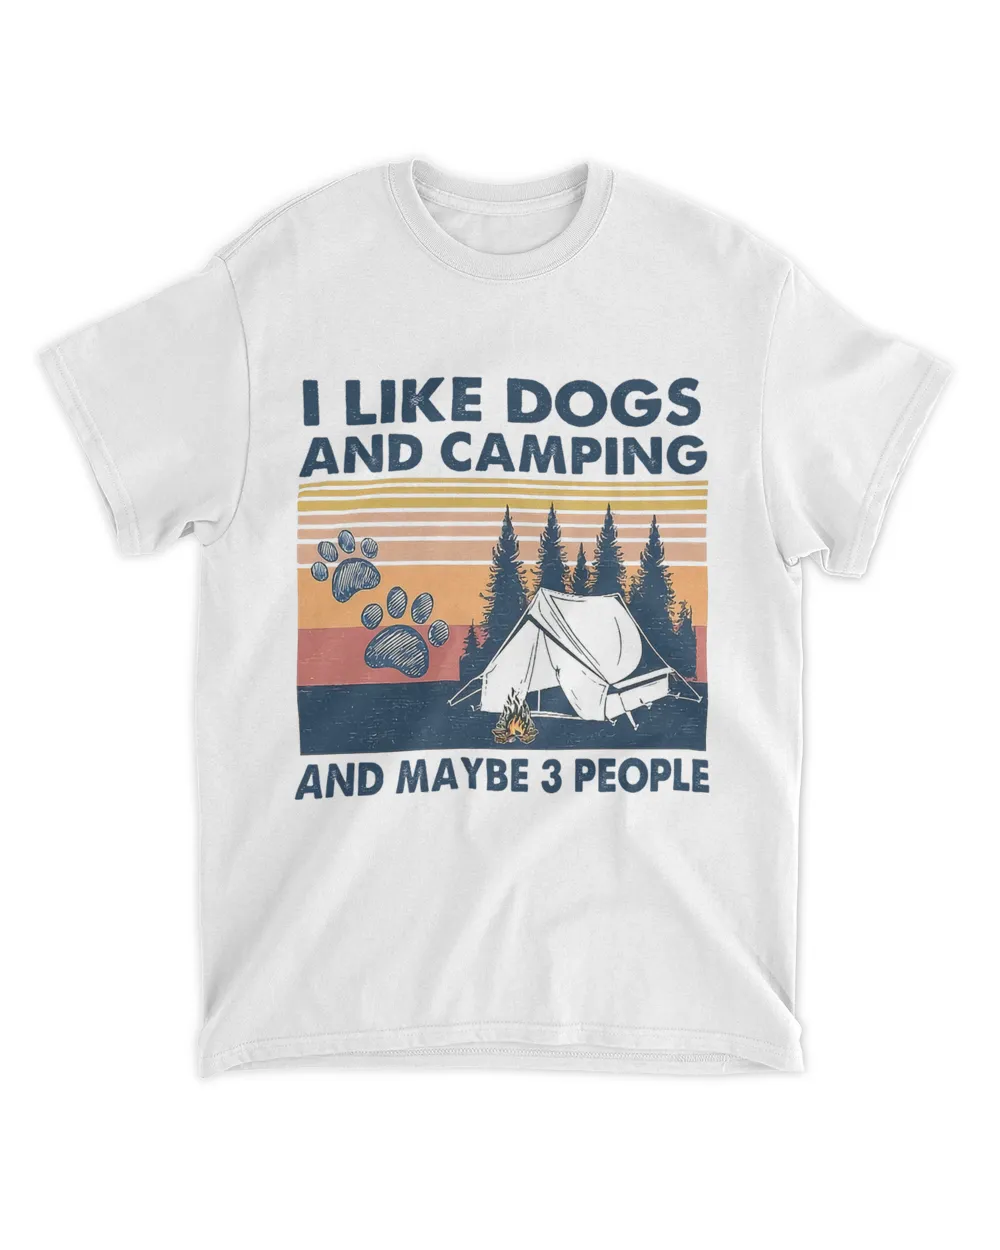 I Like Dog And Camping And May Be 3 People Shirt Unisex Standard T-Shirt white 